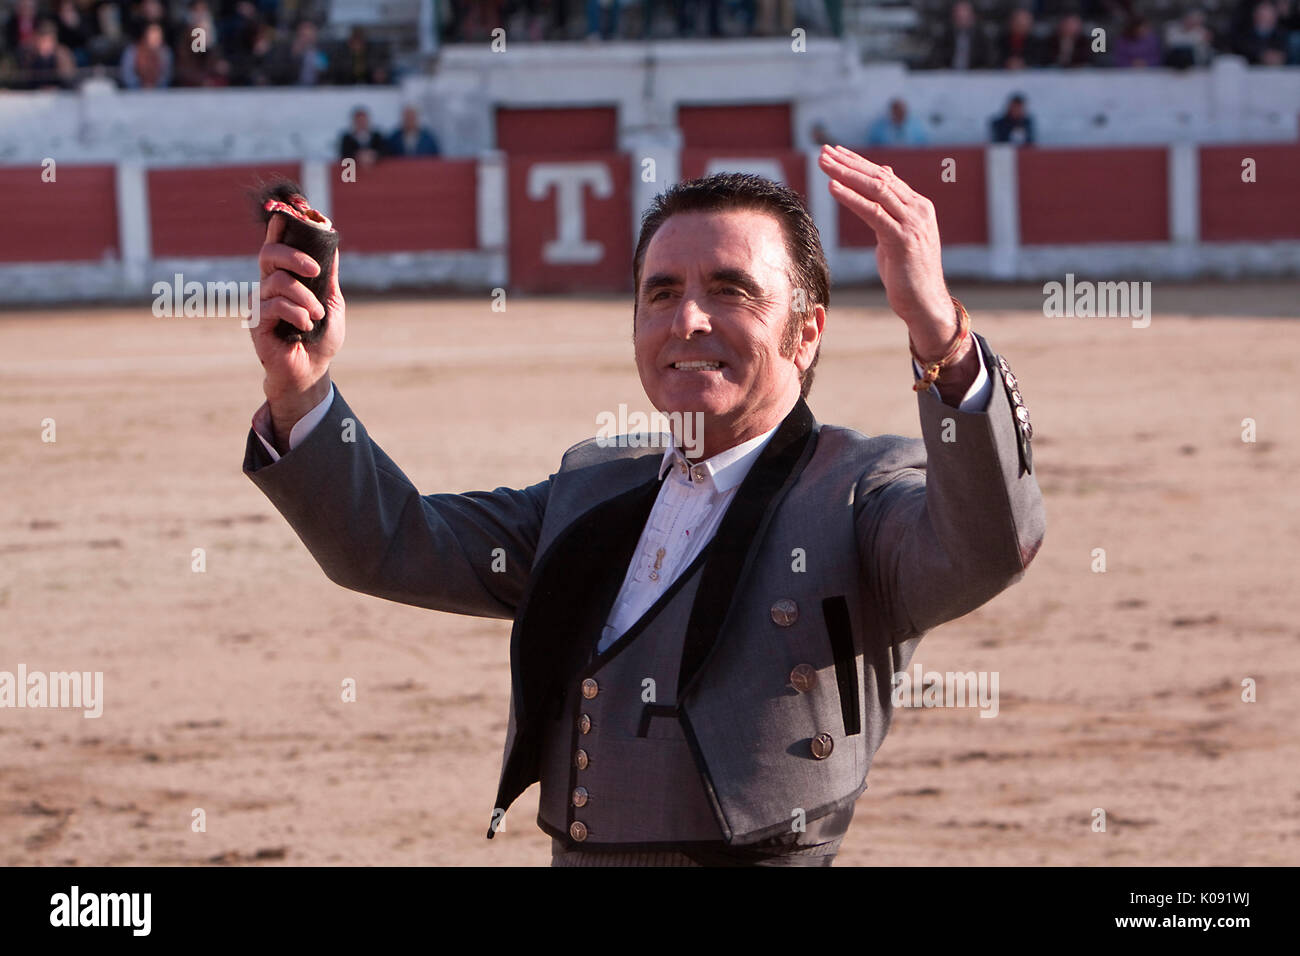 The Spanish Bullfighter Jose Ortega Cano to the turning of honour with an ear in his hand, Linares, province of Jaen, Spain, 14 march 2010 Stock Photo